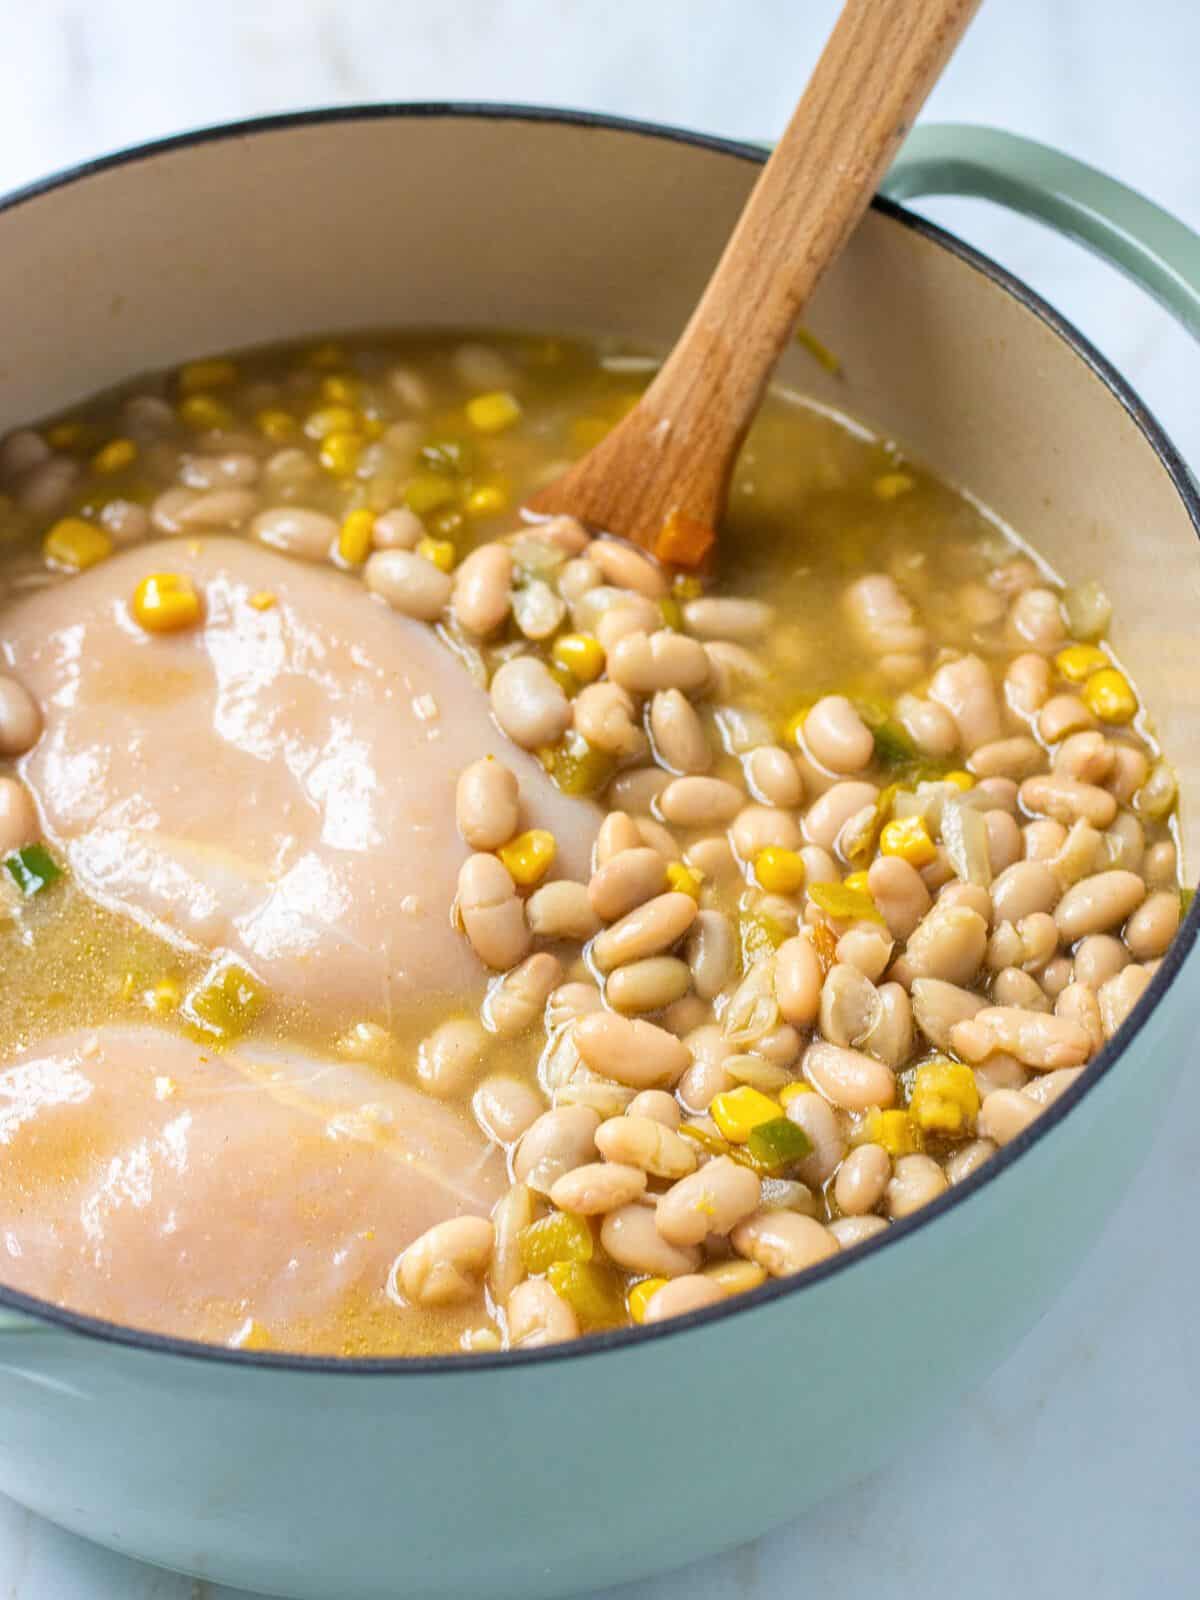 Broth, chicken, and beans added to a Dutch oven with a wood spoon.